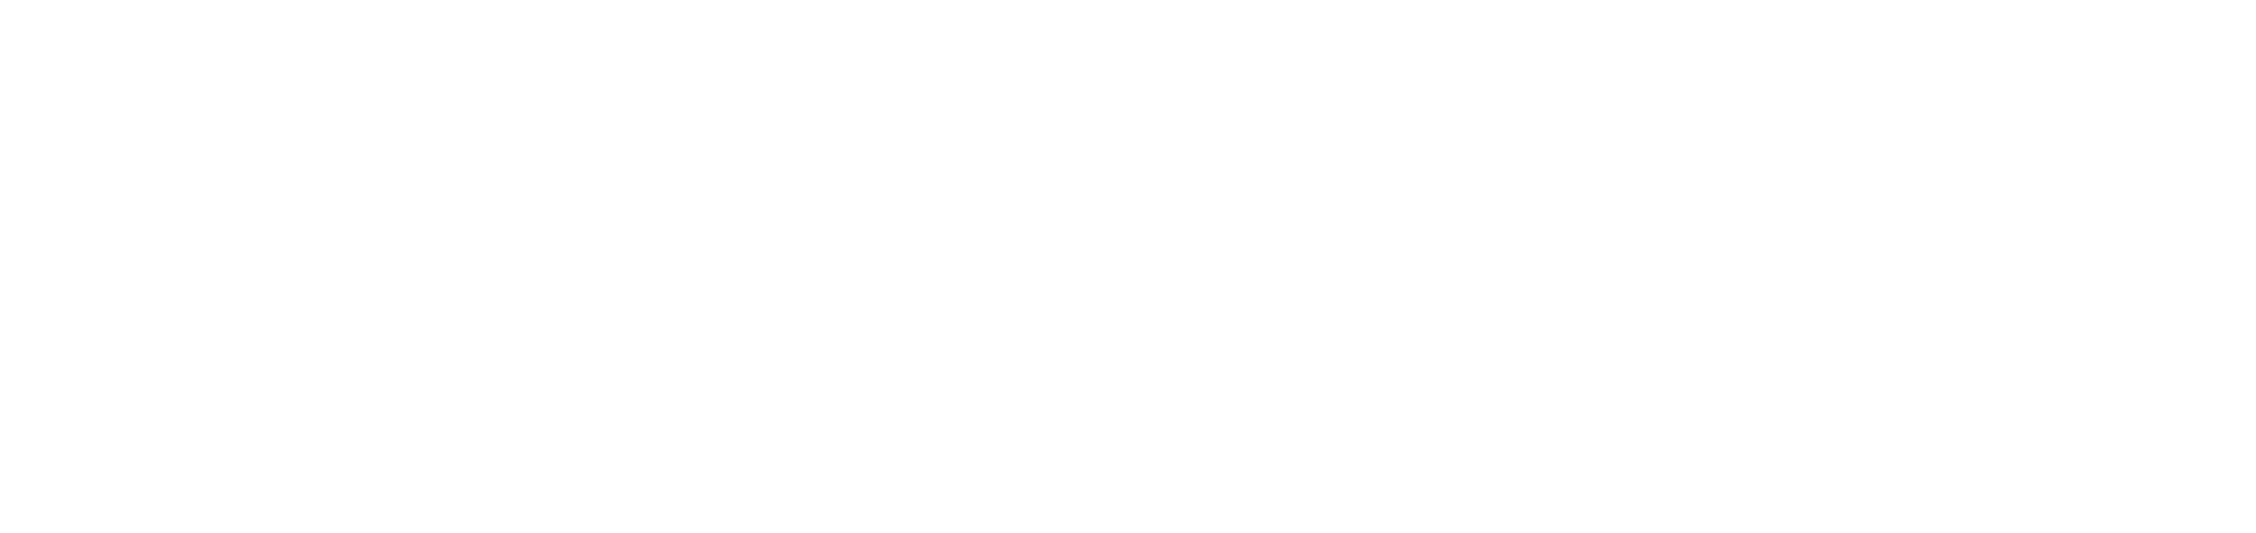 DashboardFox - bring your data to life